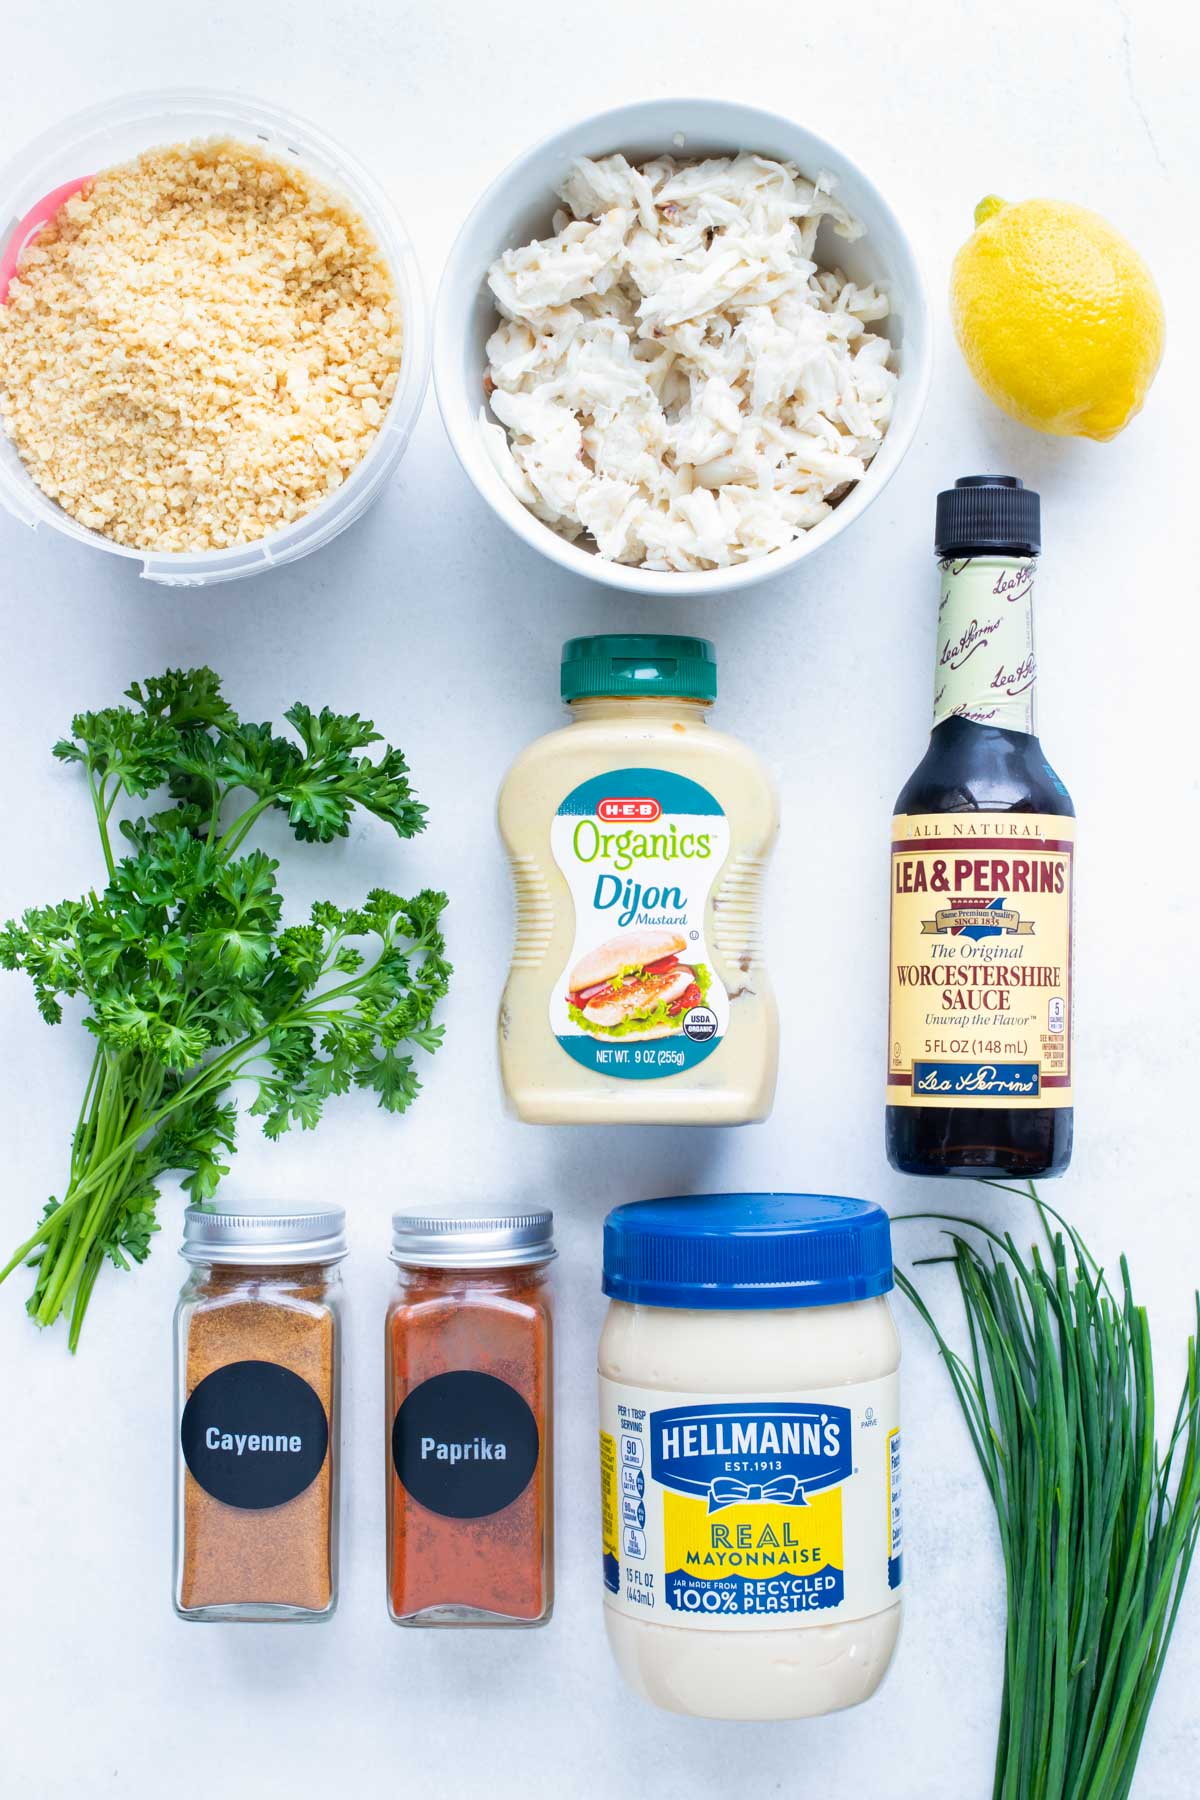 Crab meat, egg, breadcrumbs, seasonings, chives, lemon, mustard, worcestershire sauce, and mayonnaise are the ingredients in this recipe.